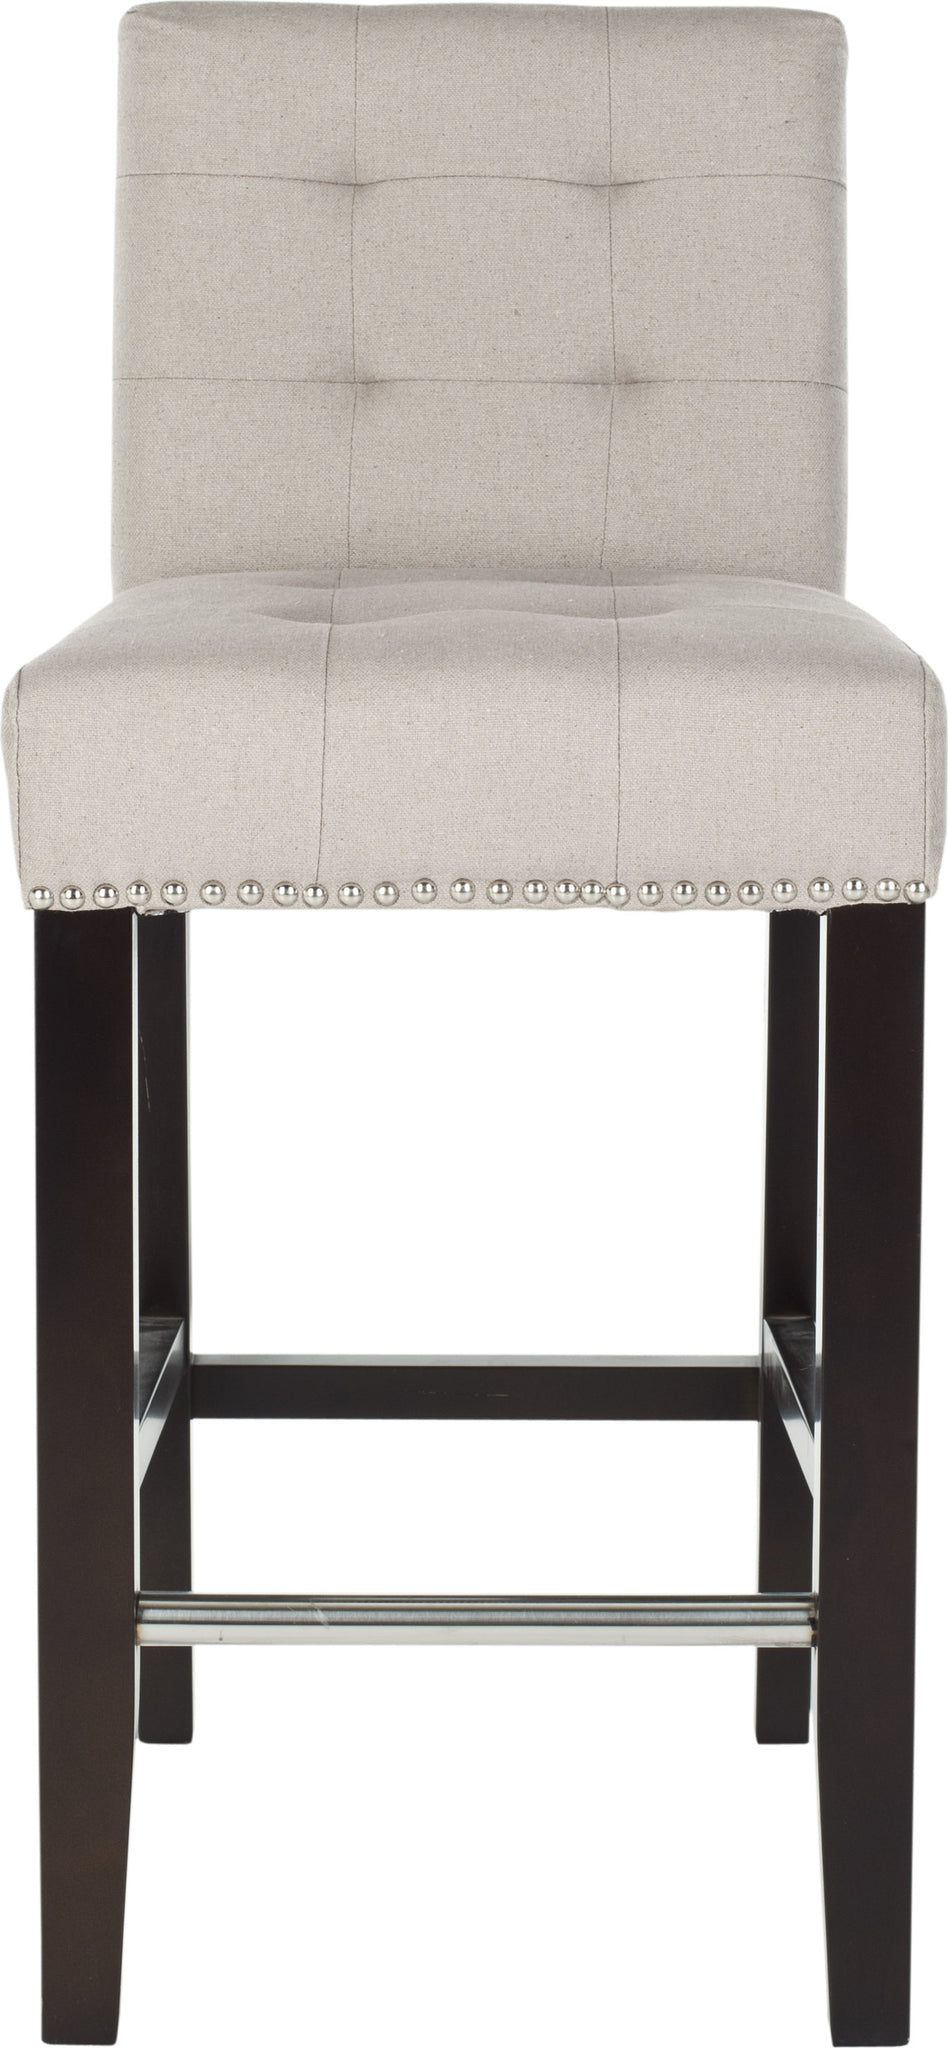 Safavieh Thompson 239'' Linen Counter Stool With Silver Nailheads Taupe and Espresso Furniture main image